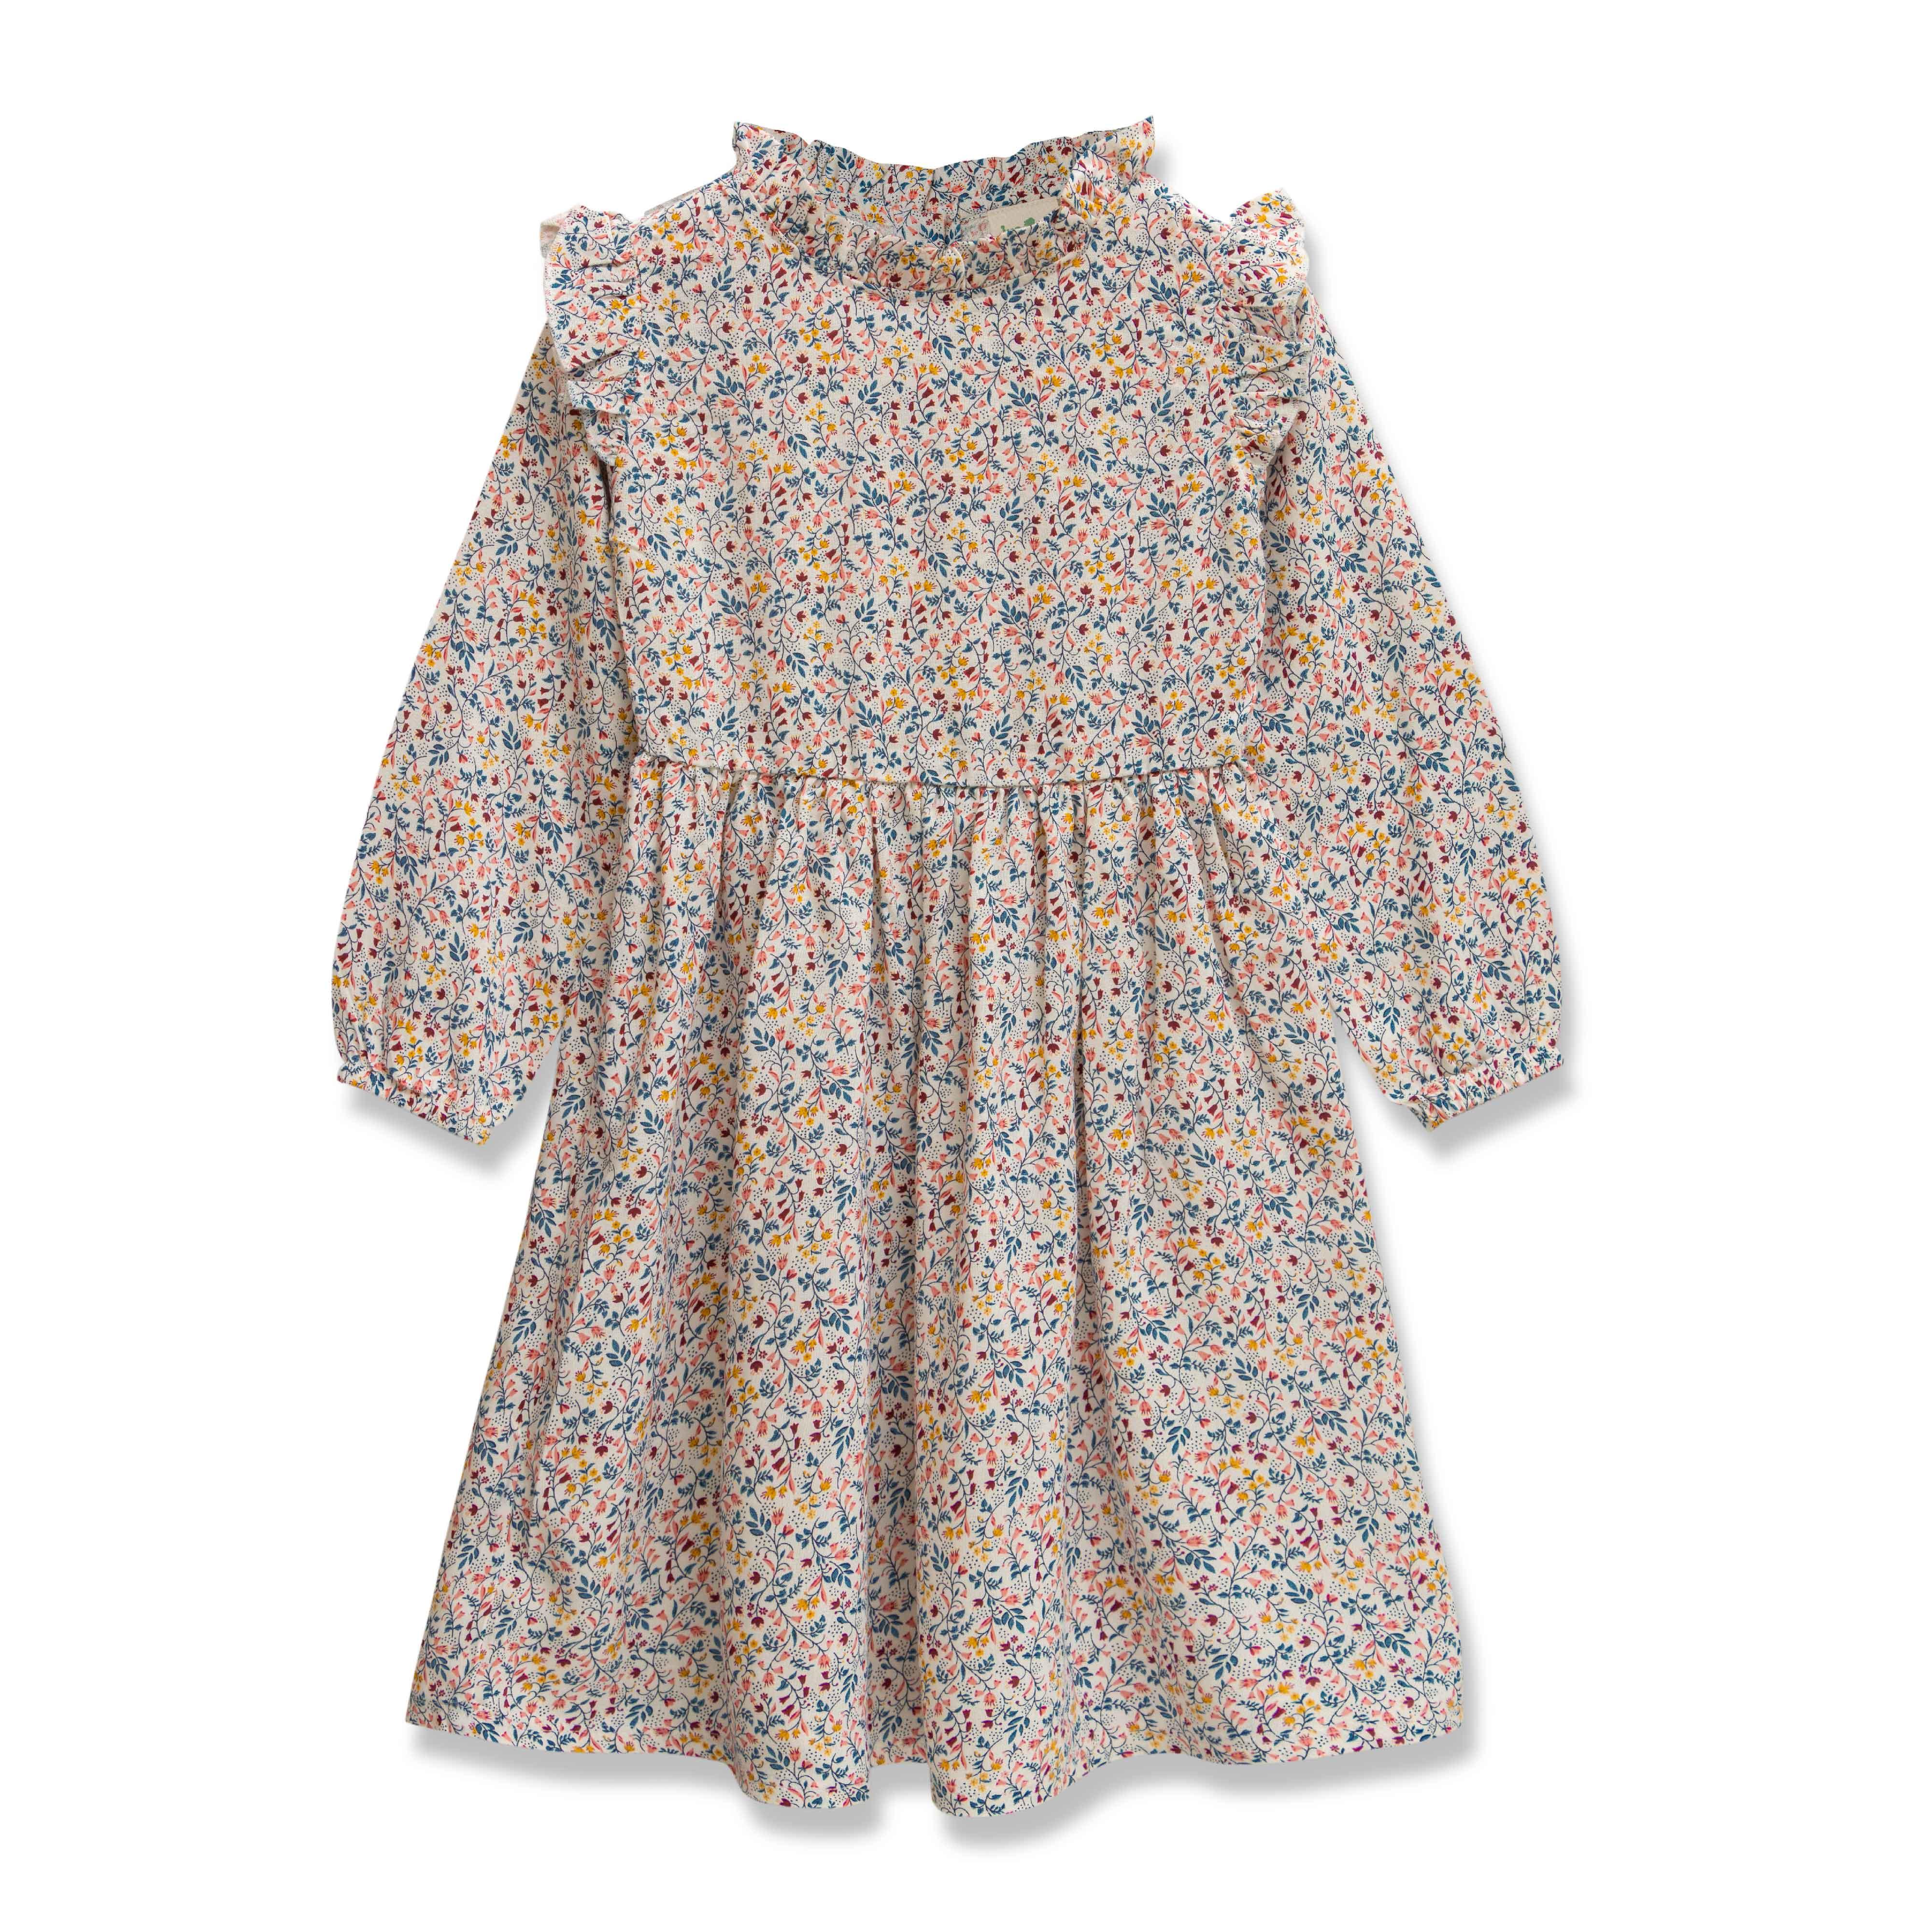 Young Girls All Over Printed Fit & Flare Dress